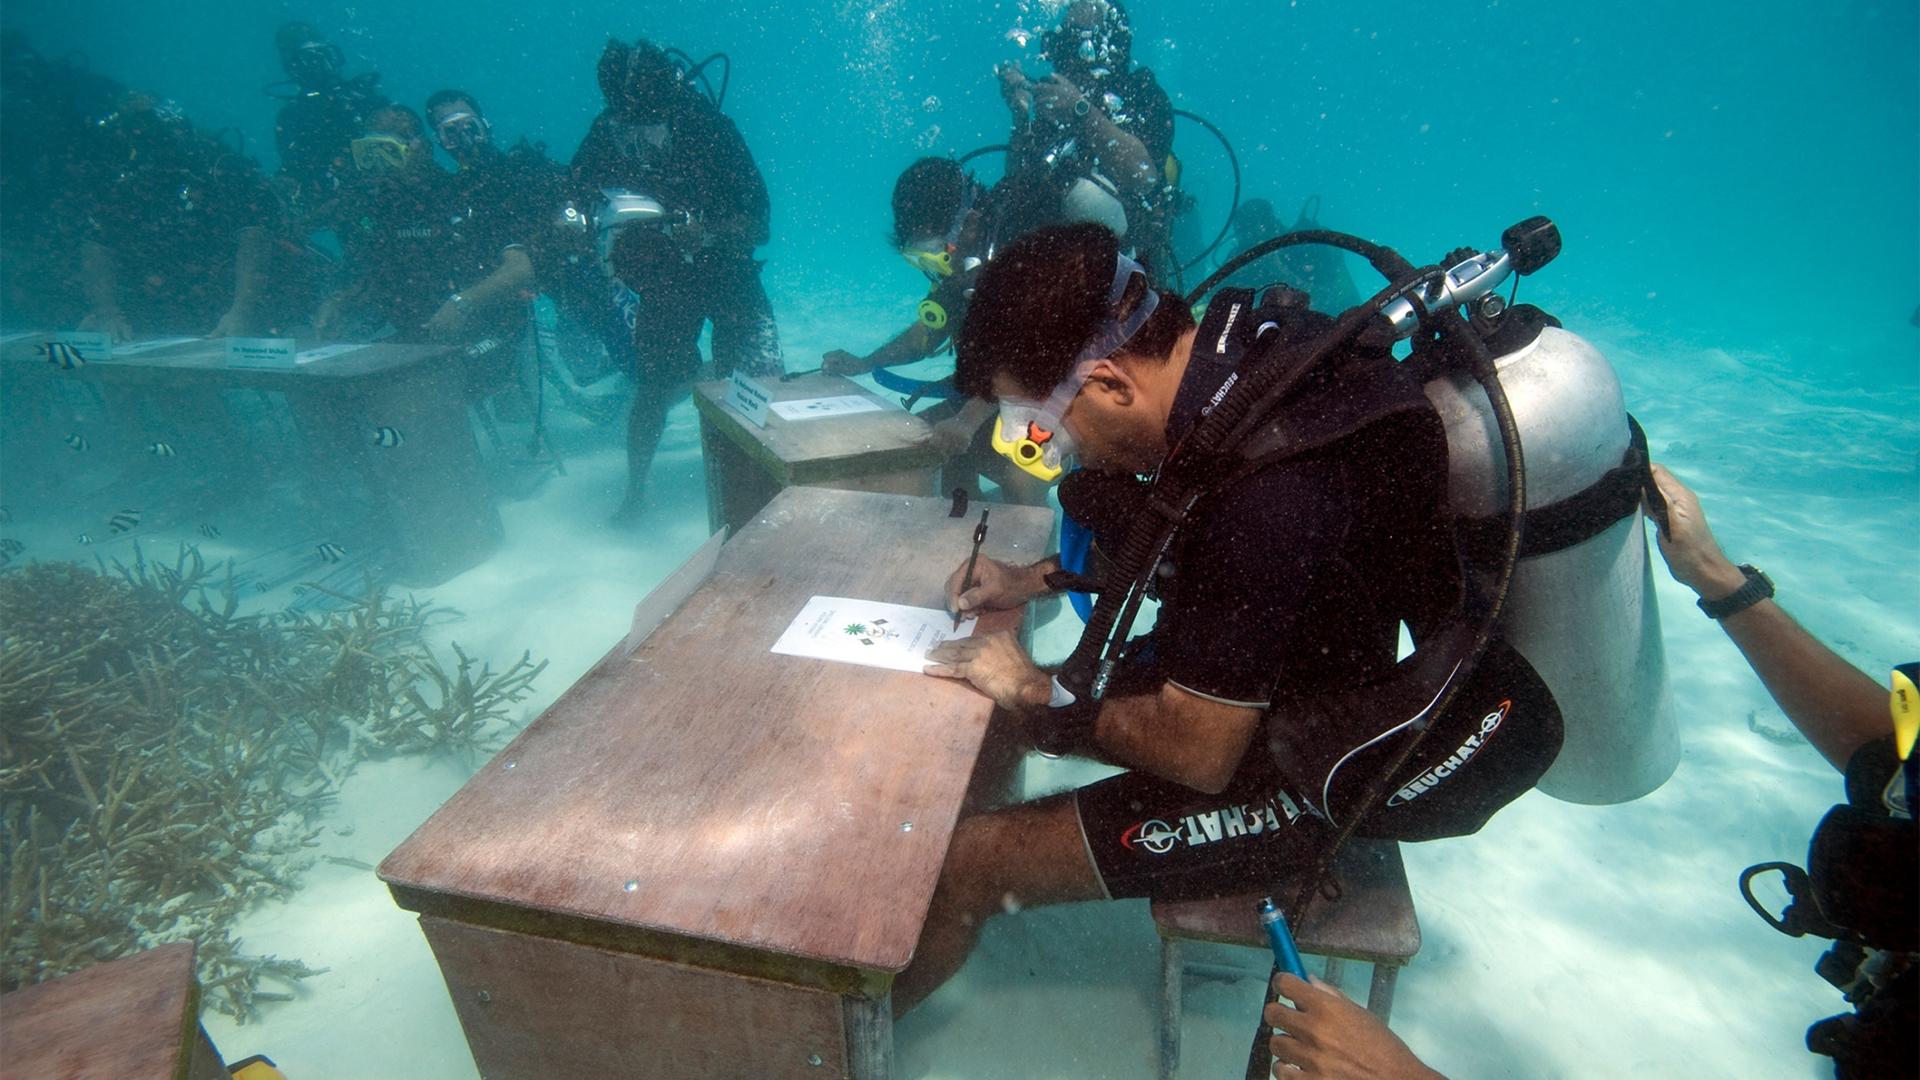 Maldivian President Mohammed Nasheed signs a document underwater calling on all countries to cut down their carbon dioxide emissions in Girifushi, about 20 minutes by speedboat from the capital Male, Maldives